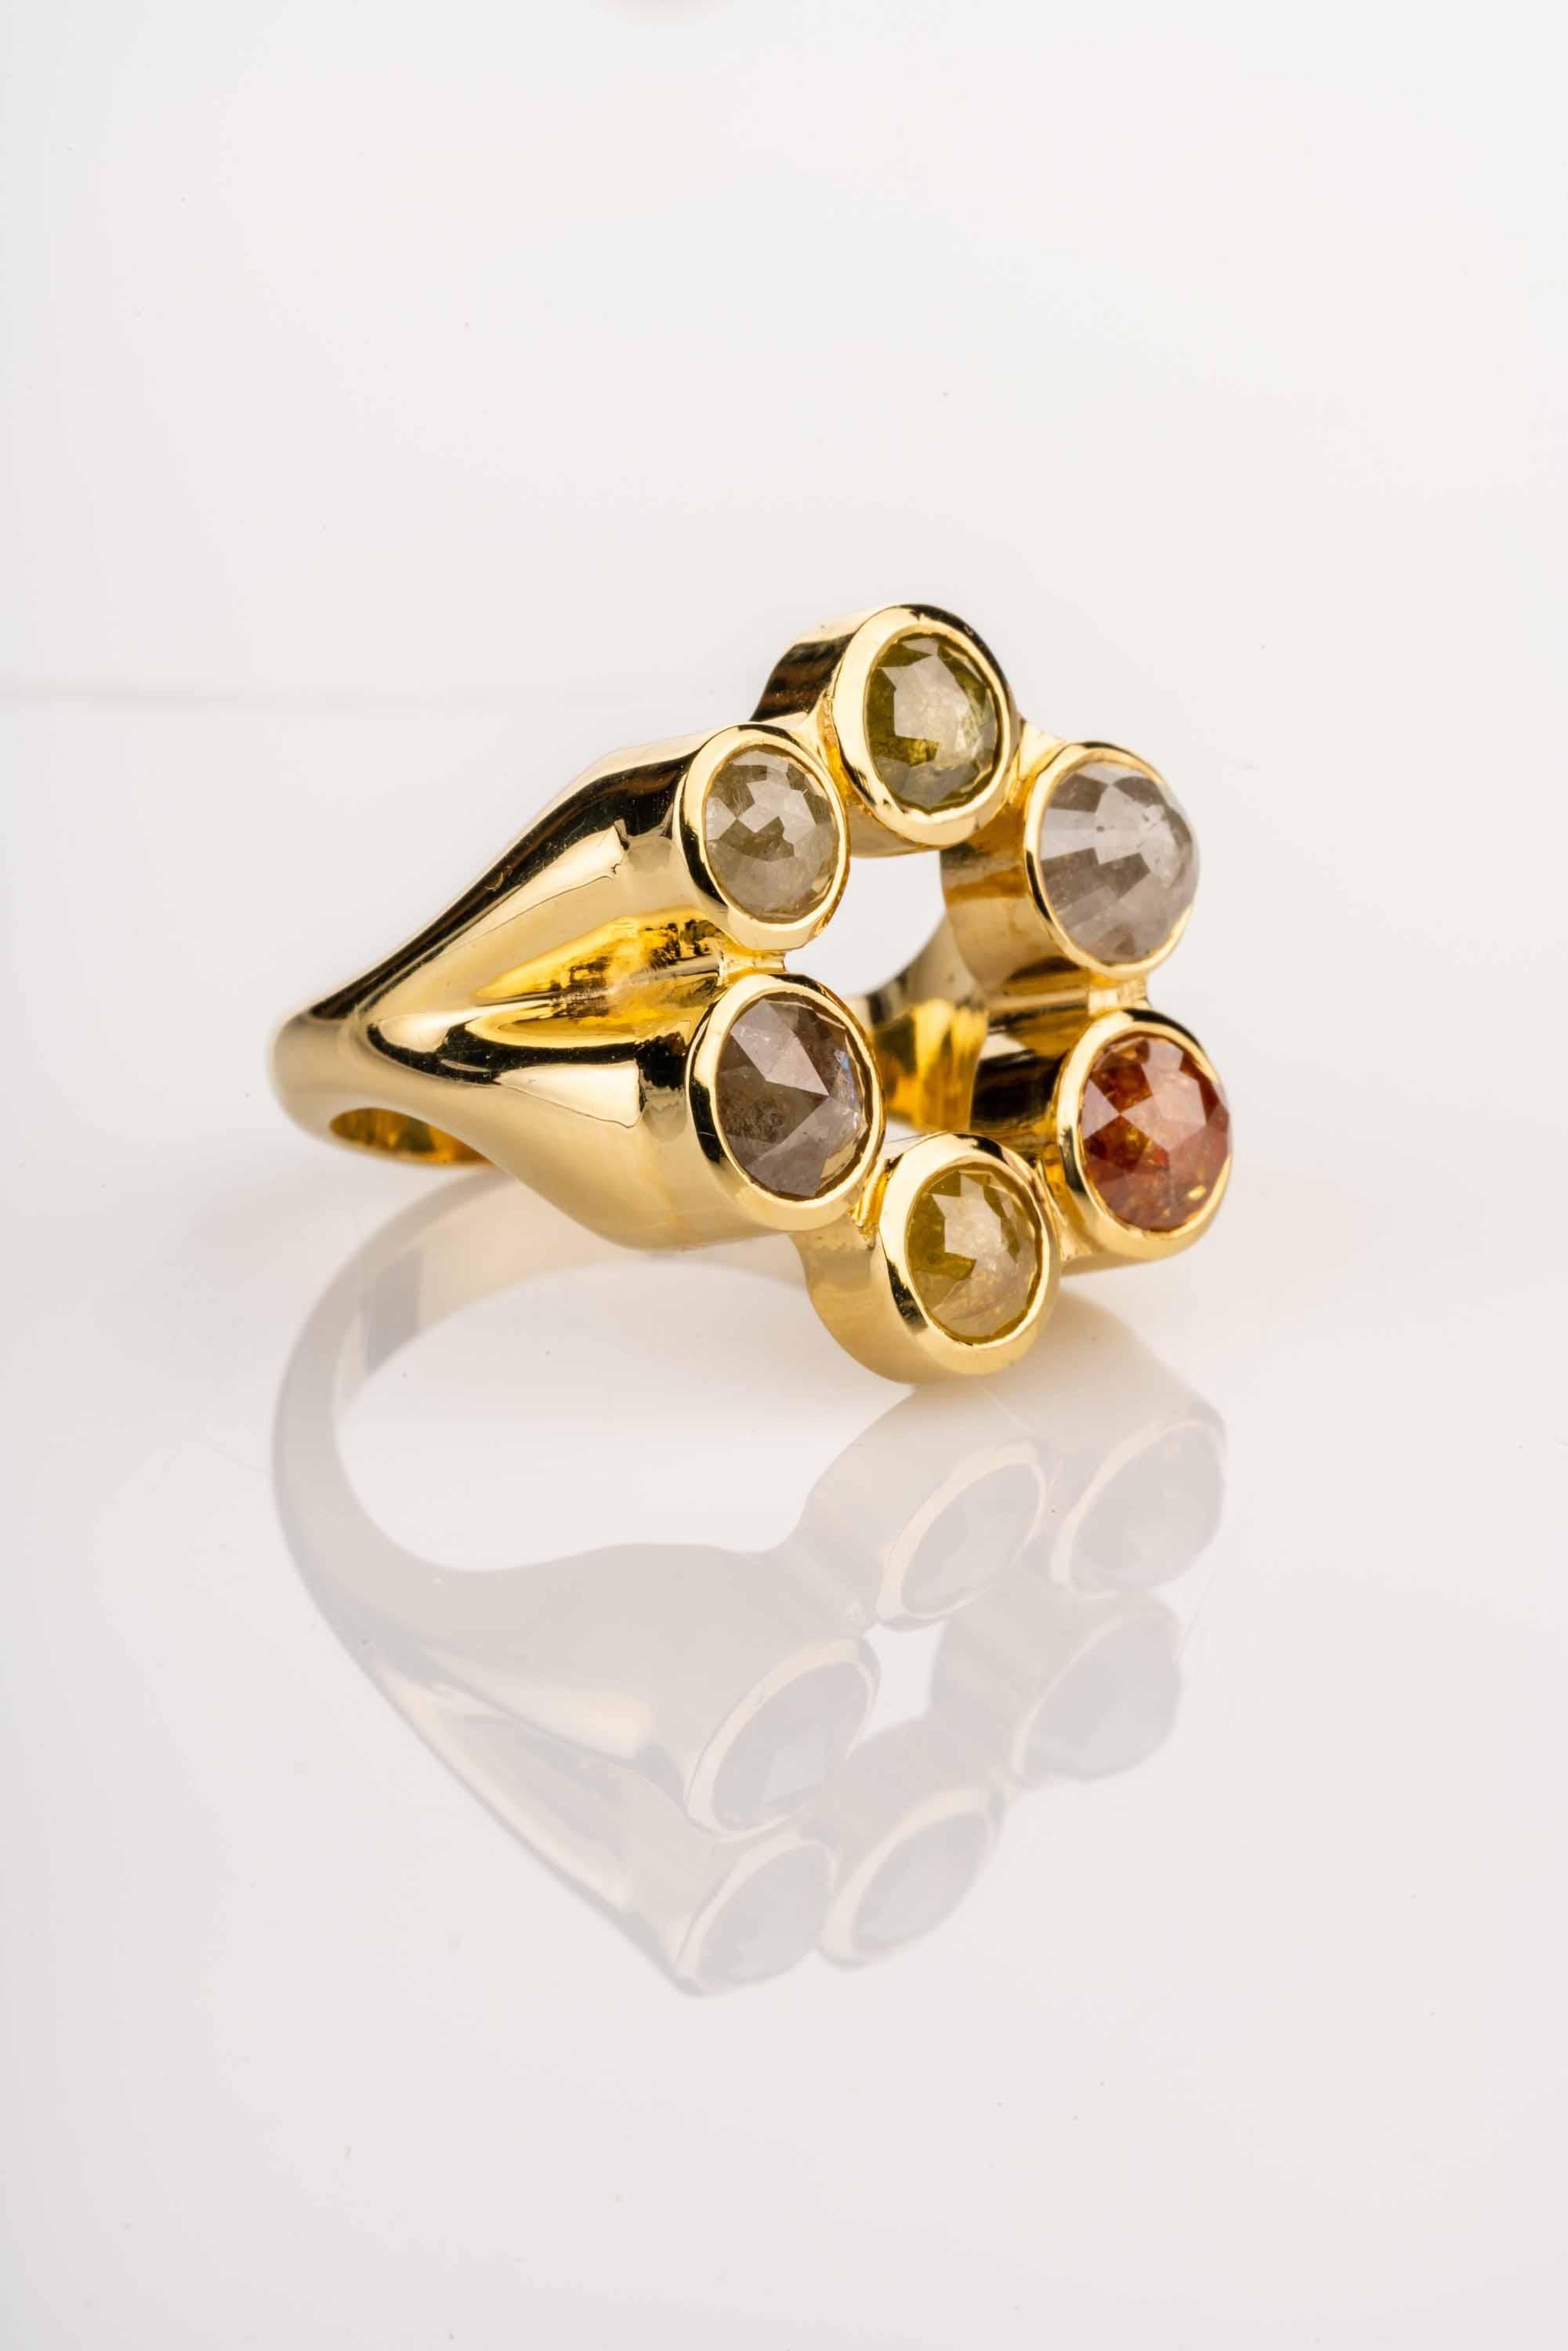 Contemporary 18 Karat Yellow Gold Ring with Yellow, Grey, and Red Rose Cut Diamonds